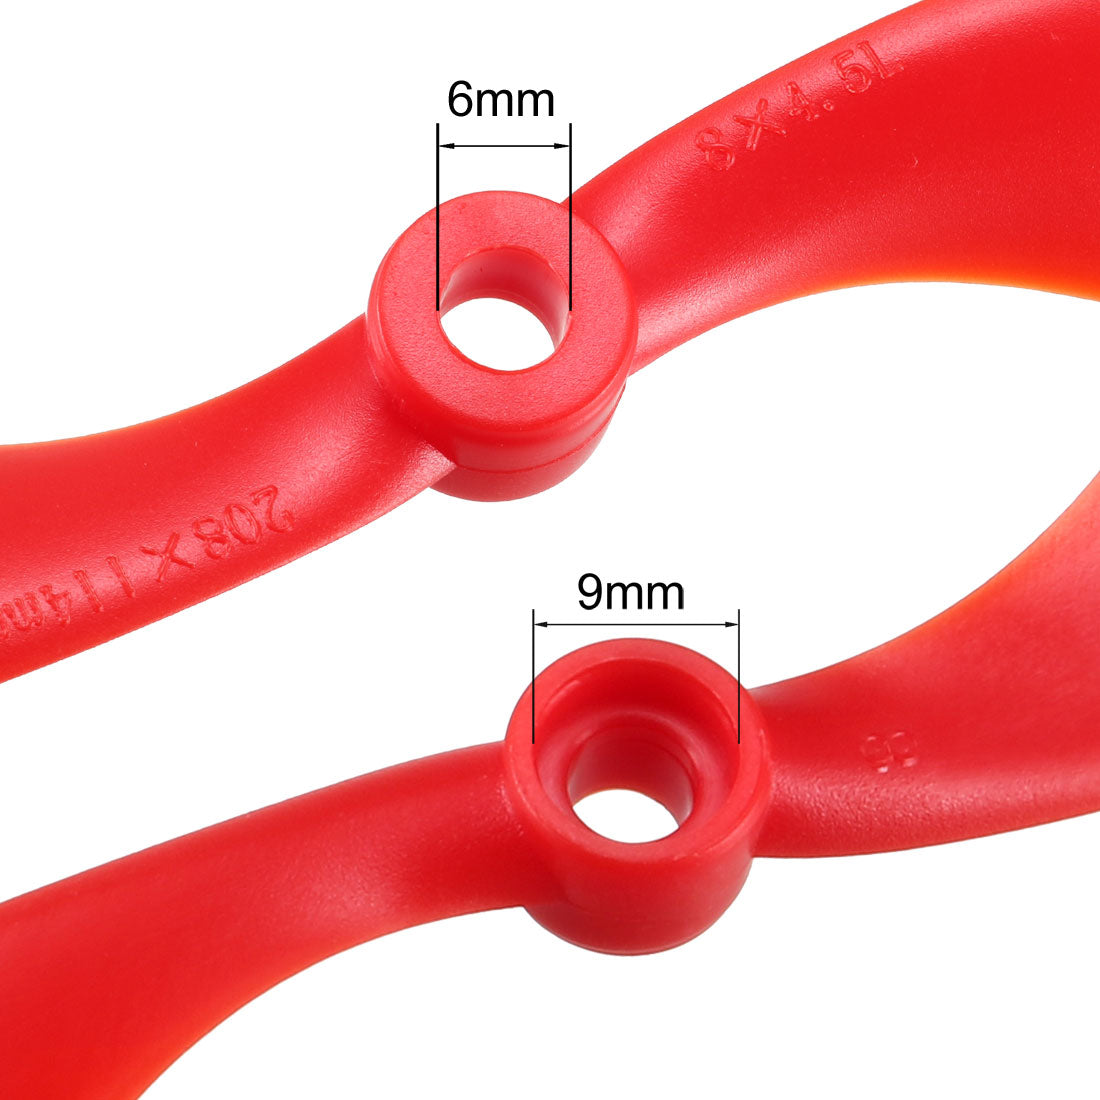 uxcell Uxcell RC Propellers  C 8045 8x4.5 Inch 2-Vane Fixed-Wing for Airplane Toy, Nylon Red 2 Pairs with Adapter Rings